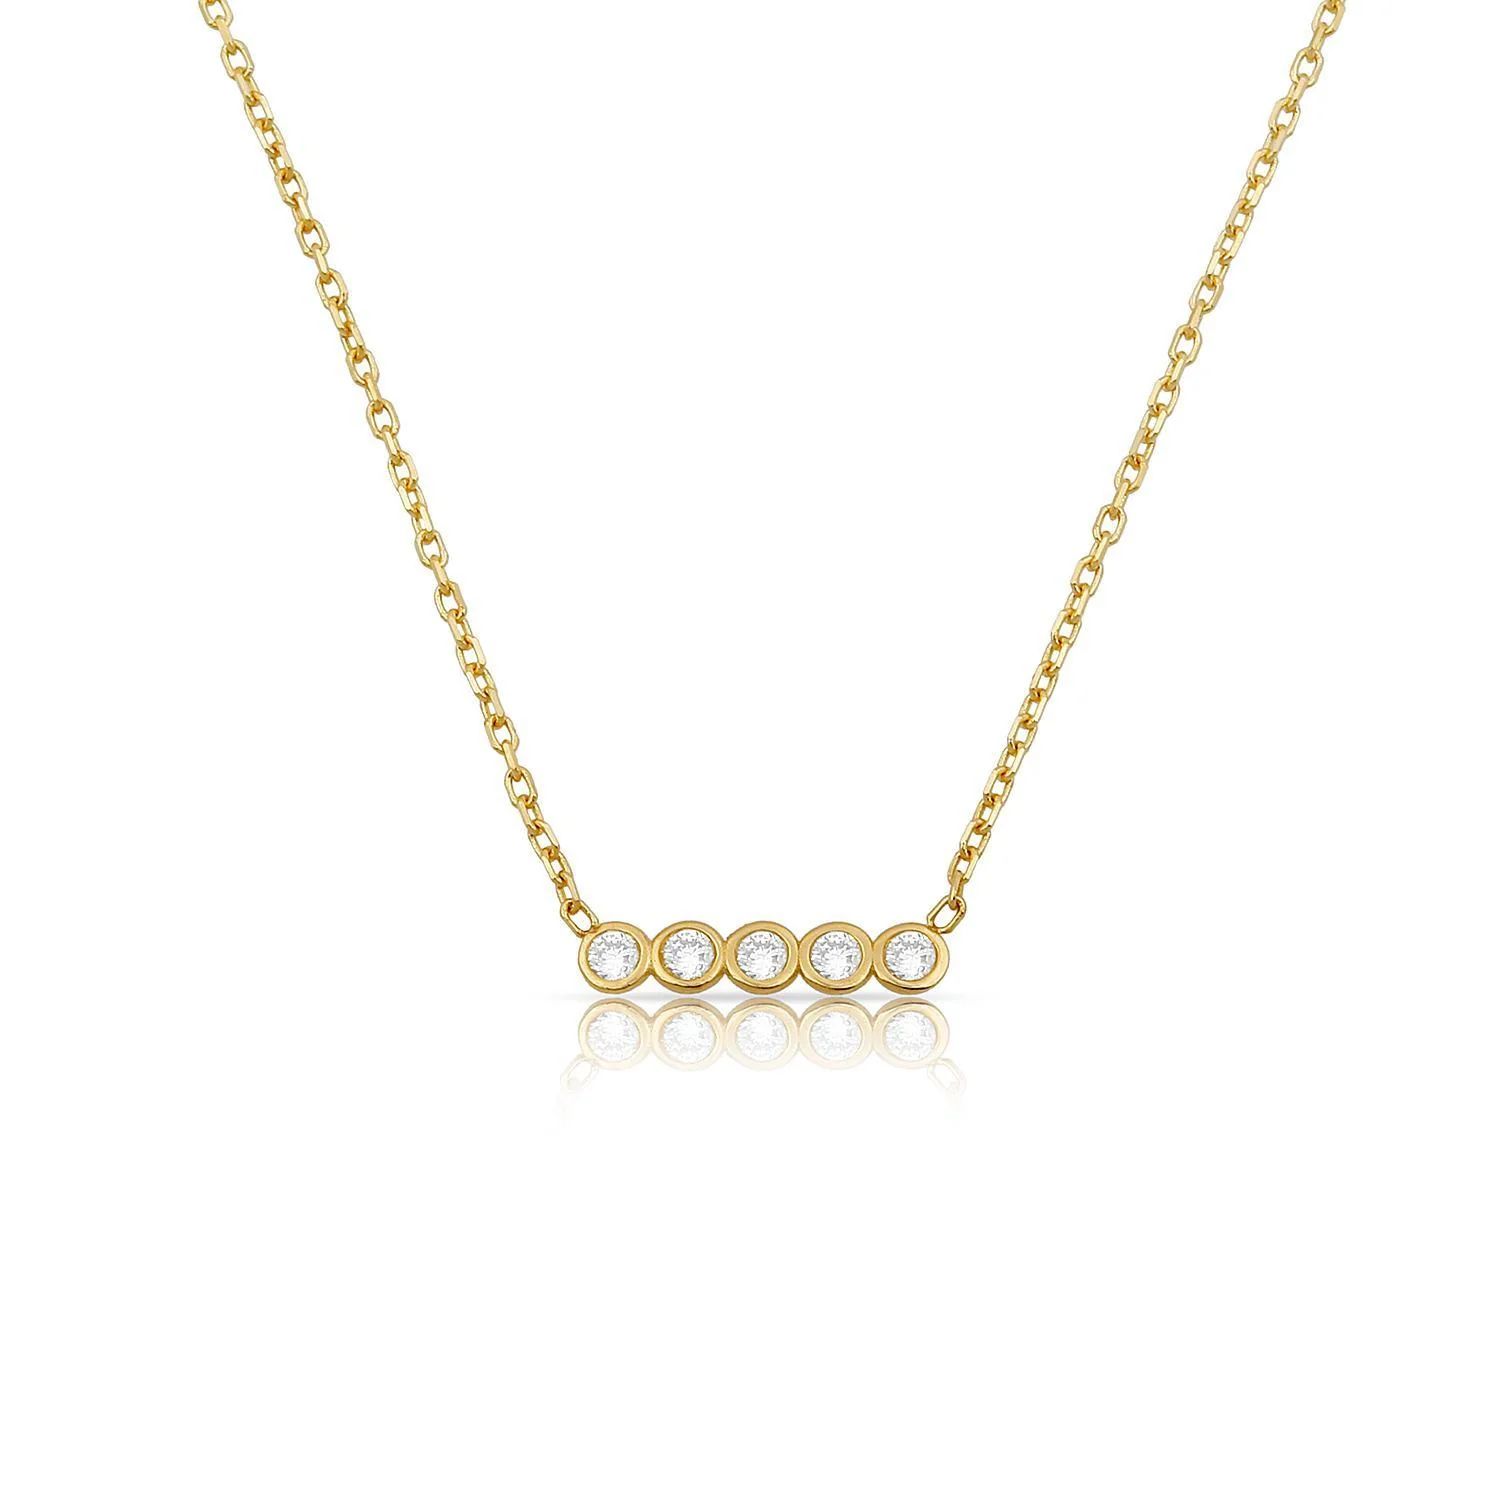 Loverly Crystal Bar Necklace | The Sis Kiss